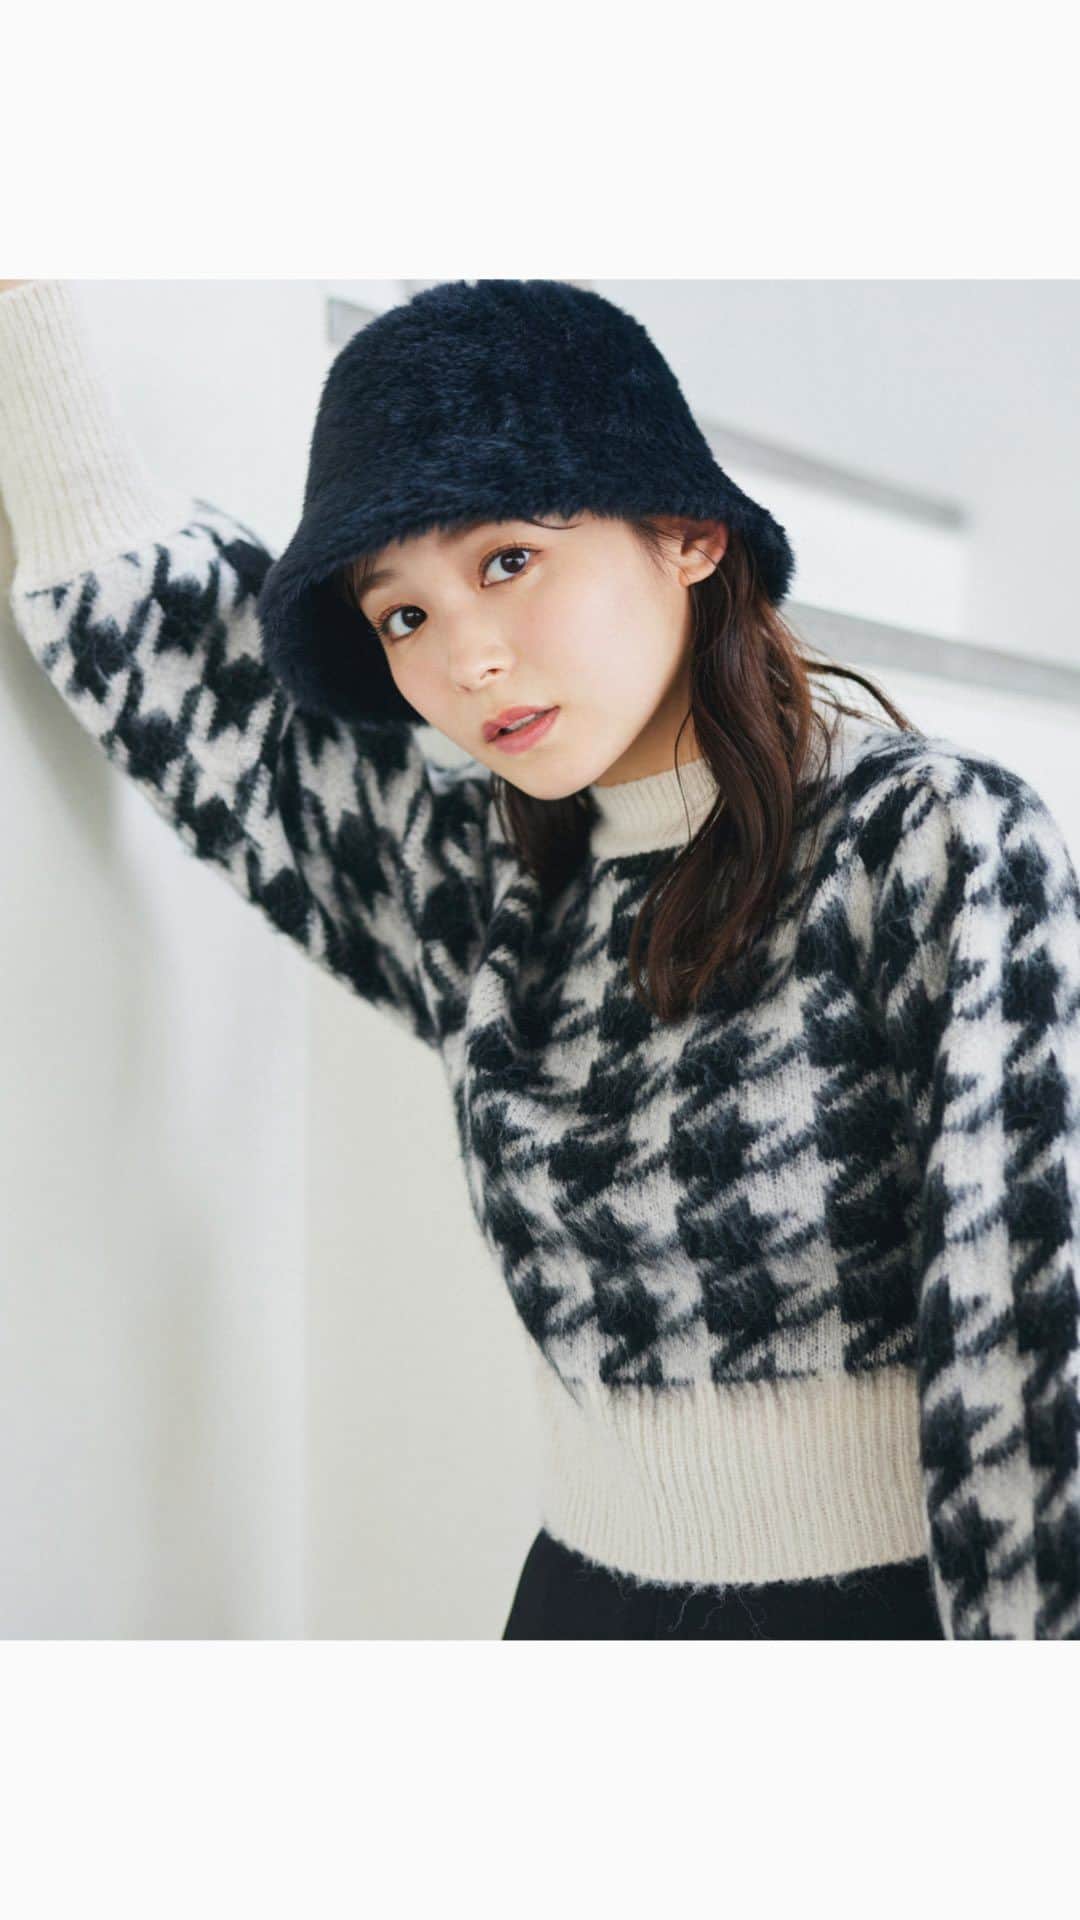 archives_officialのインスタグラム：「【KNIT COLLECTION 】　 ⁡ The Playful Mind feat.#久間田琳加(@rinka_kumada0223) ⁡ 久間田琳加が着こなす archivesのKNIT COLLECTION🧶  ⁡ 11/2(thu)10:00〜11/13(mon)10:00📢💕 久間田琳加さん着用アイテムをご購入の方に ポイント10%POINT BACK！! ※オンラインサイトPMbox限定となります。 ⁡ ⁡ KNIT COLLECTIONの特集ページも公開中📄 是非チェックして下さい！！ ⁡ ⁡ @archives__official  ⁡ ⁡ #アルシーヴ#archives#久間田琳加#りんくま#ニット#ニットコレクション」